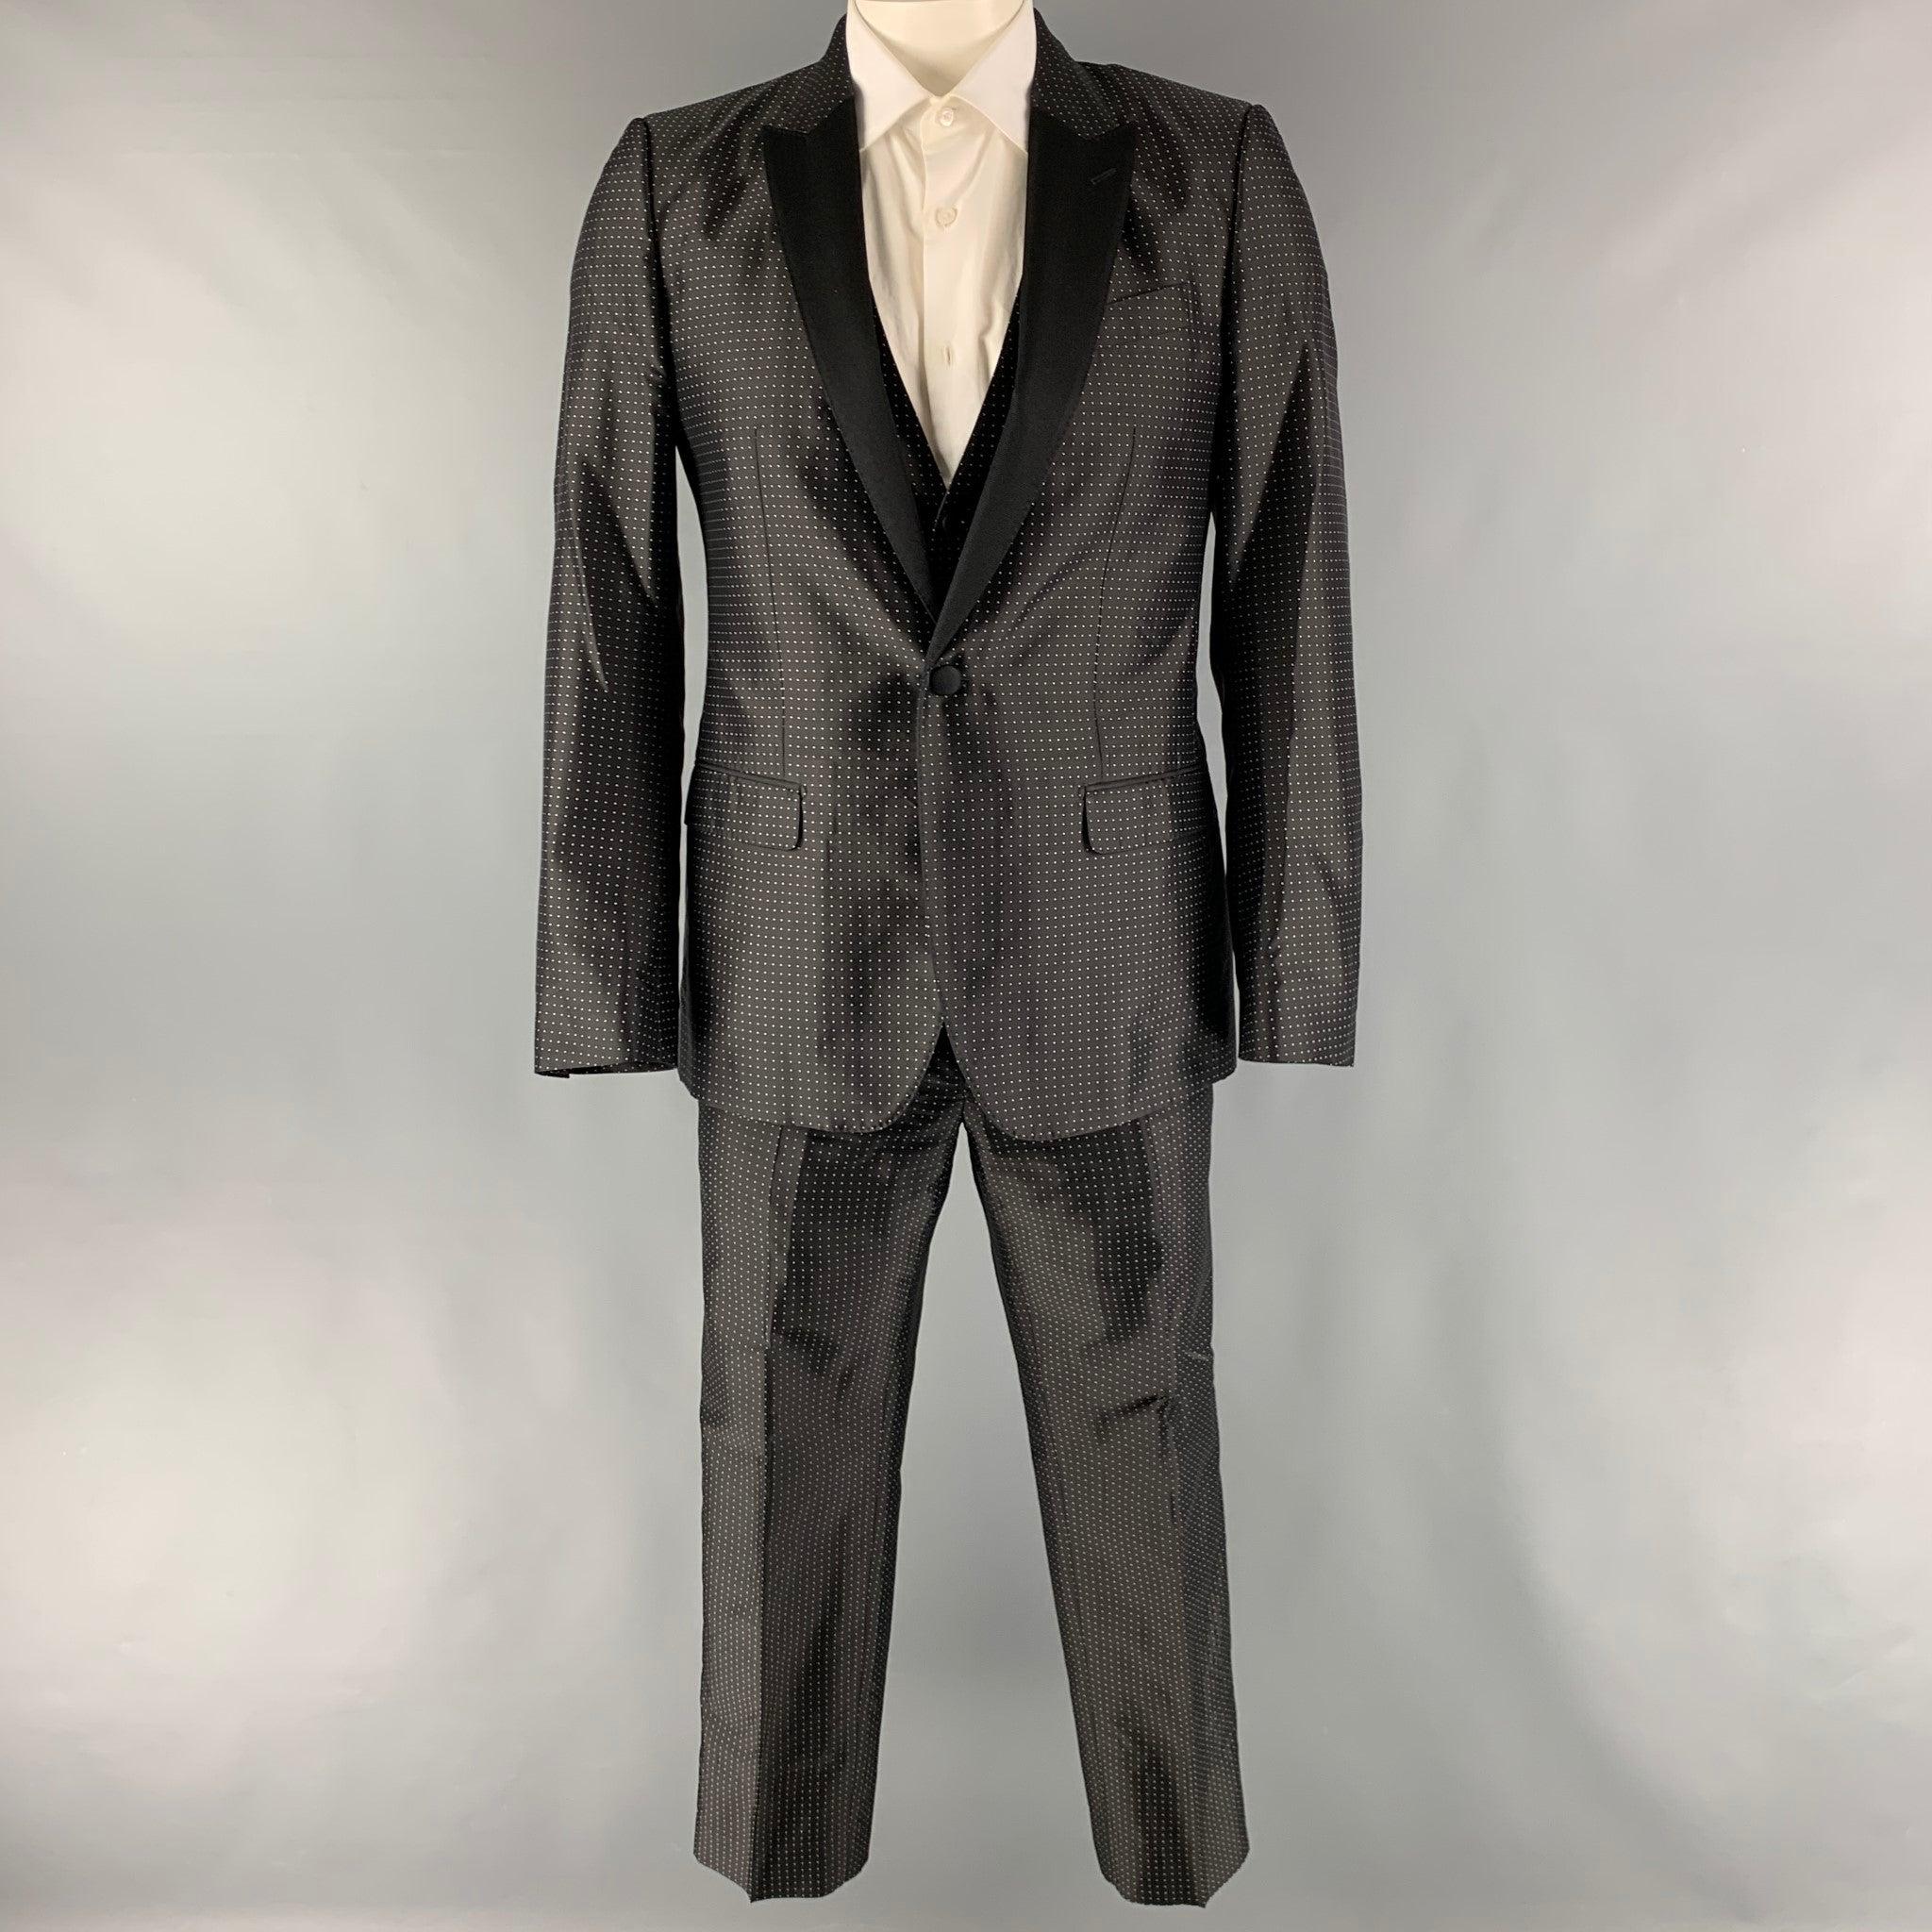 DOLCE & GABBANA 'MARTINI' 3 Piece suit comes in a black and white polka dot silk polyester woven material with a full liner and includes a single breasted, single button sport coat with a peak lapel, matching vest and flat front trousers. Made in